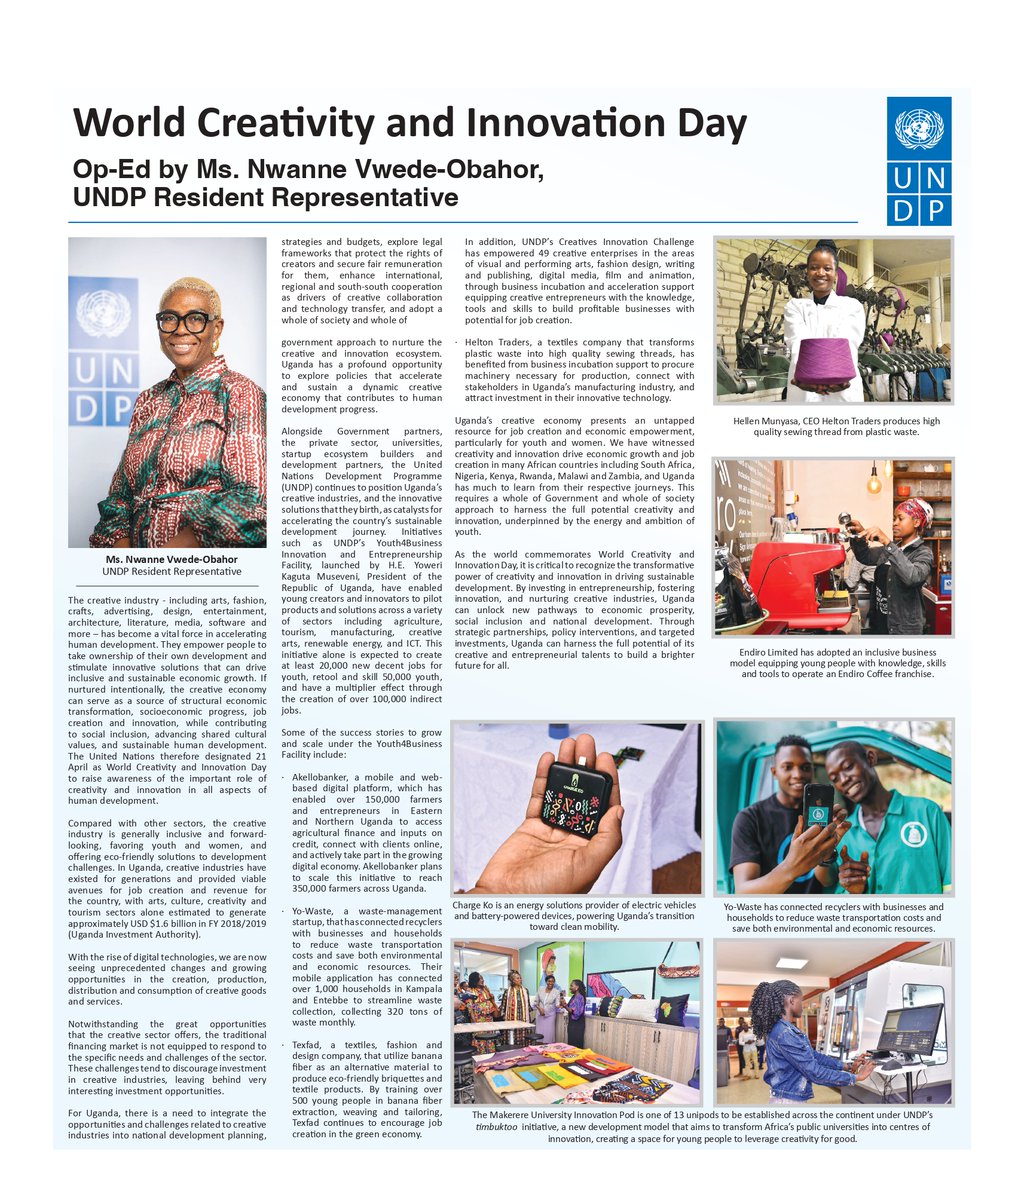 Uganda’s creative economy presents an untapped resource for job creation and economic empowerment, particularly for youth and women. @UNDPUganda Resident Representative @NwanneObahor shares her thoughts on World Creativity and Innovation Day #WCID💡 🔗bit.ly/WCIDUganda